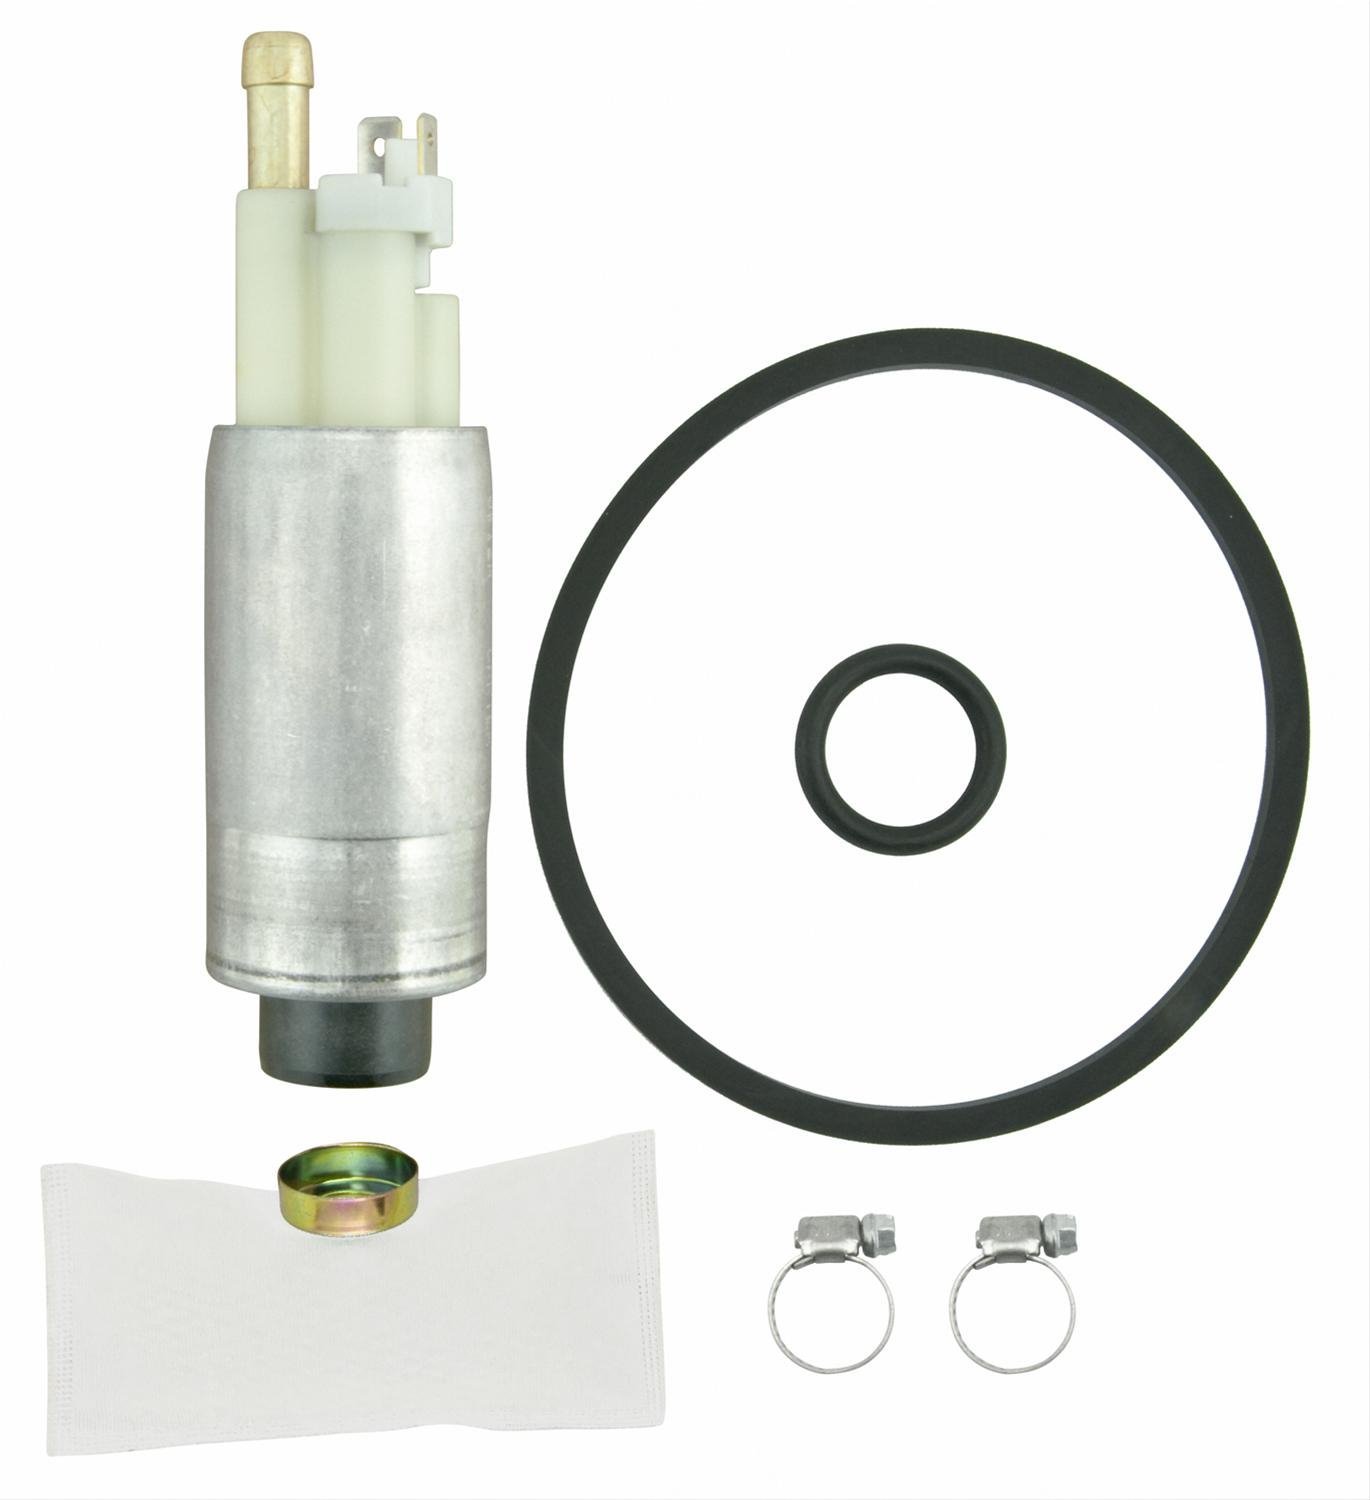 EFI In-Tank Electric Fuel Pump And Strainer Set for 1988-1990 Dodge B Series/D series/W series